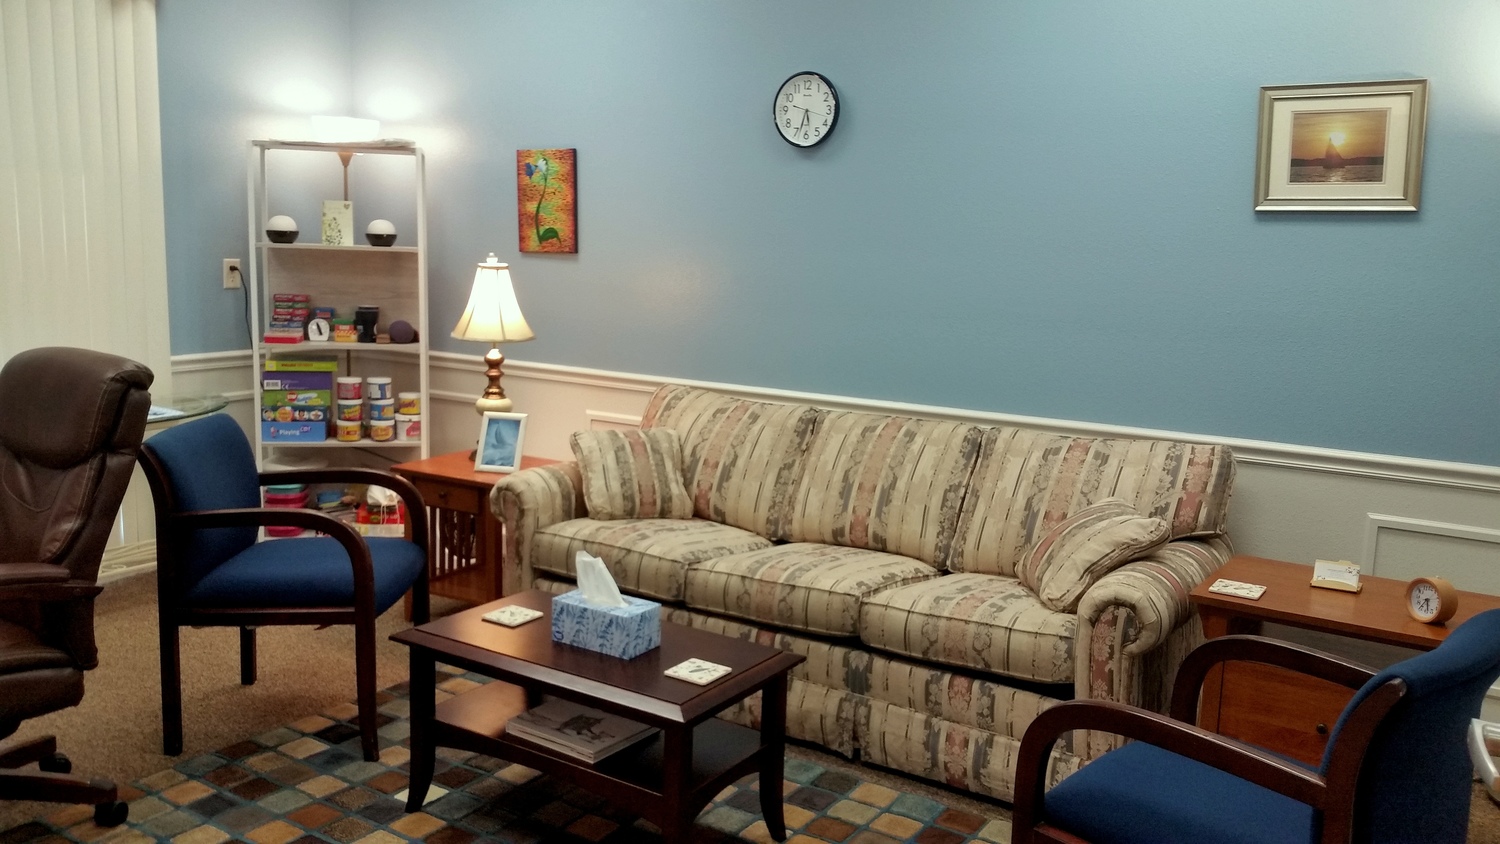 Gallery Photo of Welcome to Serenity Hope CS Counseling!